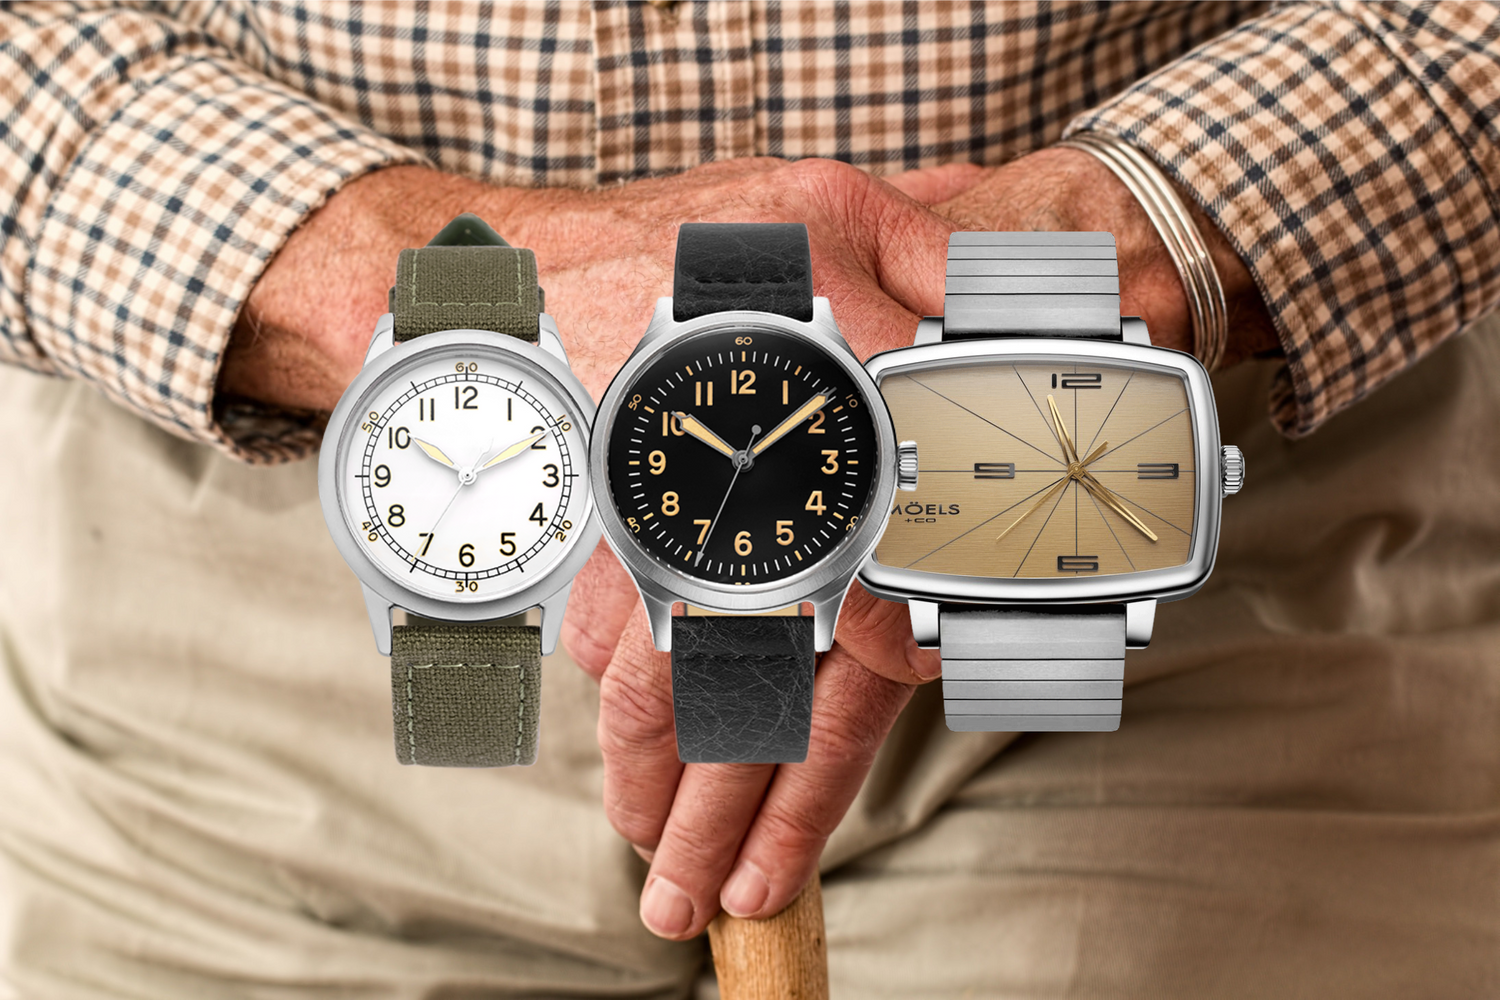 retirement watches for sale at mr watchief like preasidus and moels and co